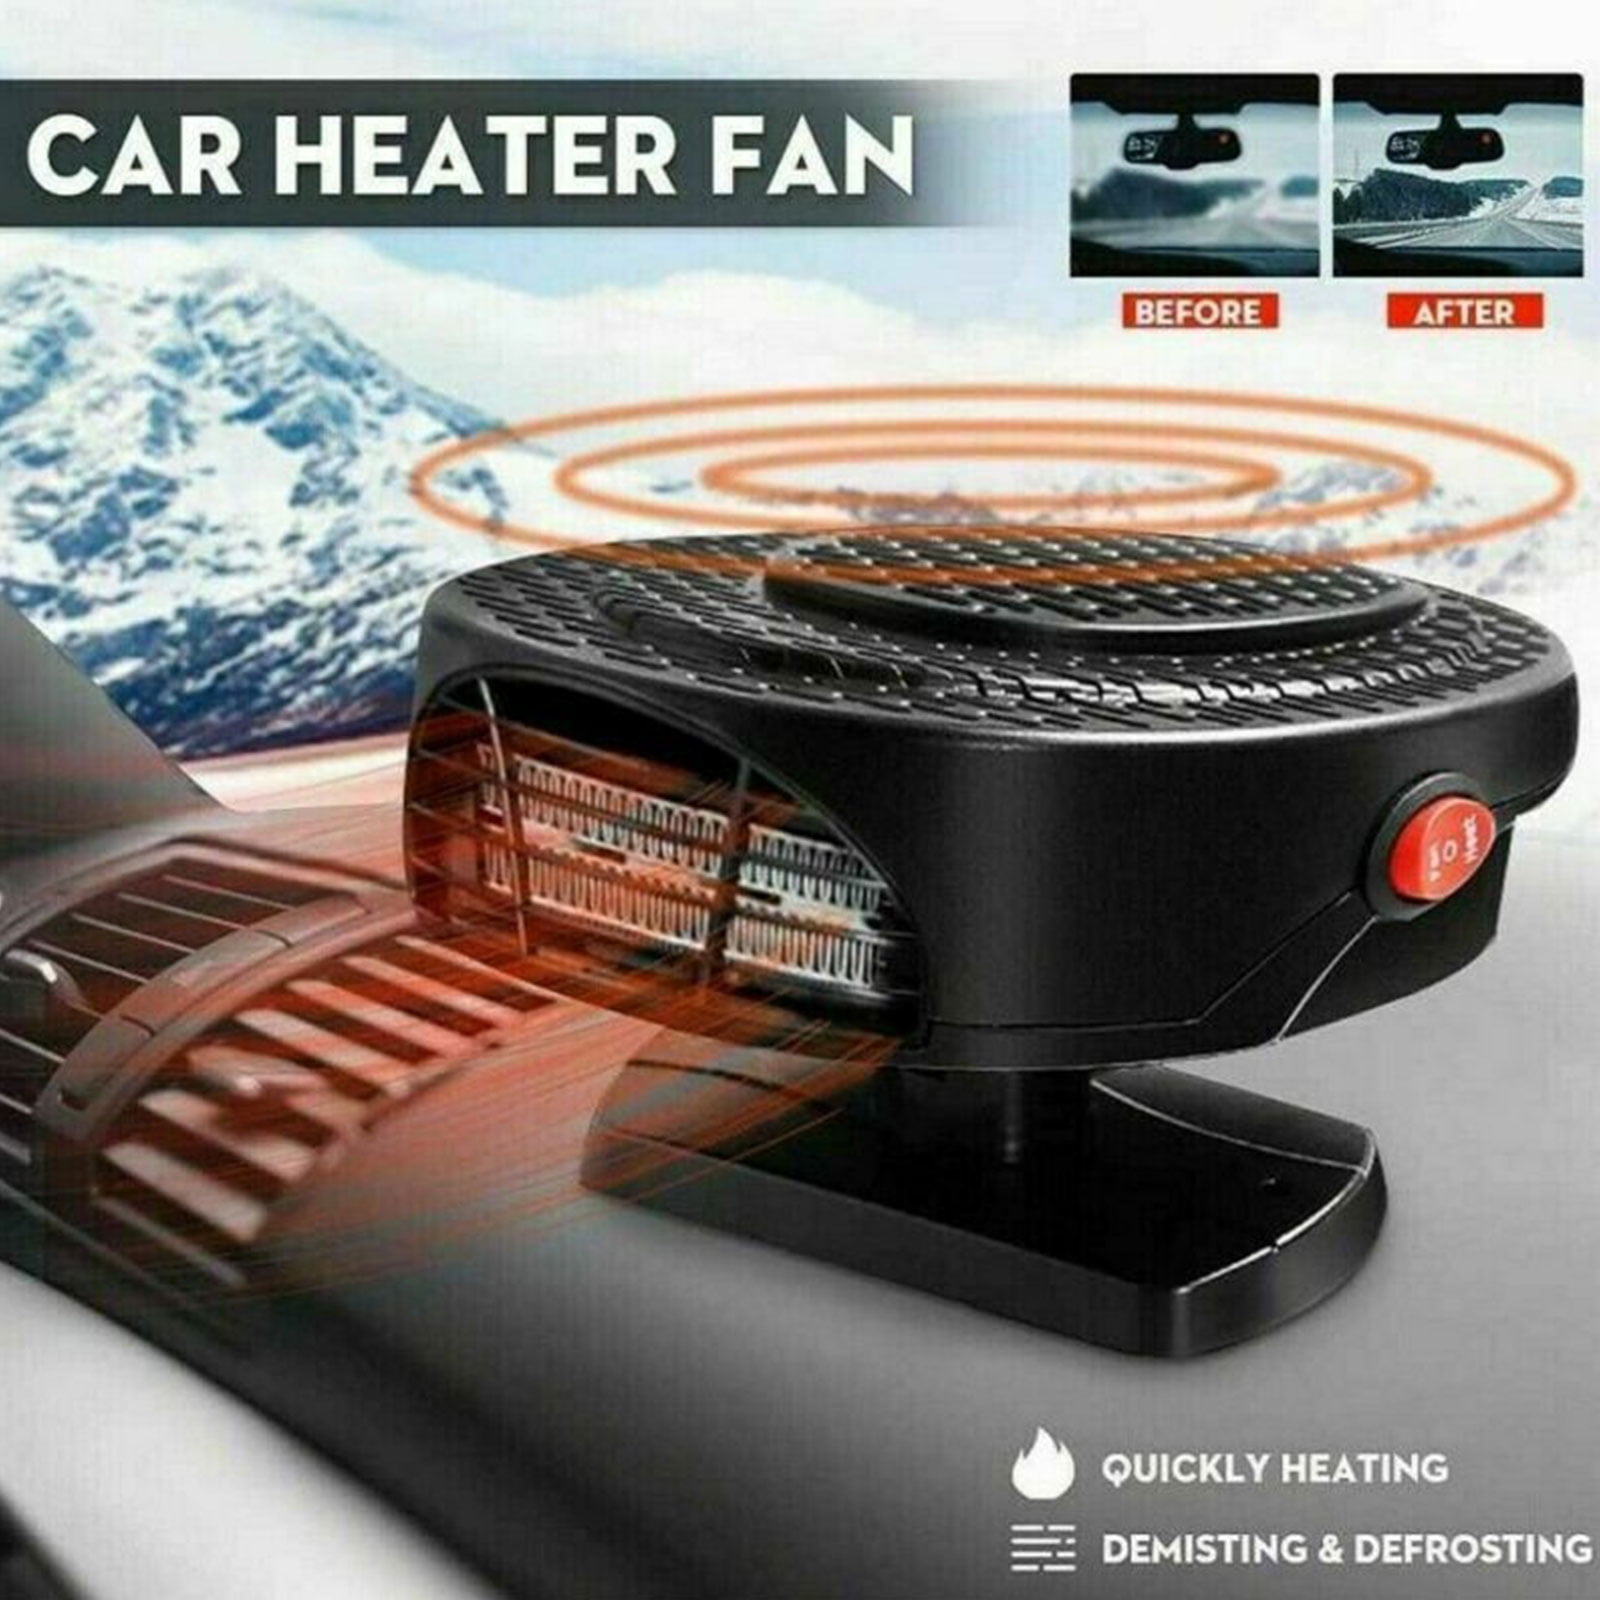 Car Heater 12V 150W Car Portable 2 in 1 Ceramic Heating Cooling Heater Fan Defroster Demister Universal For Most Of Car 